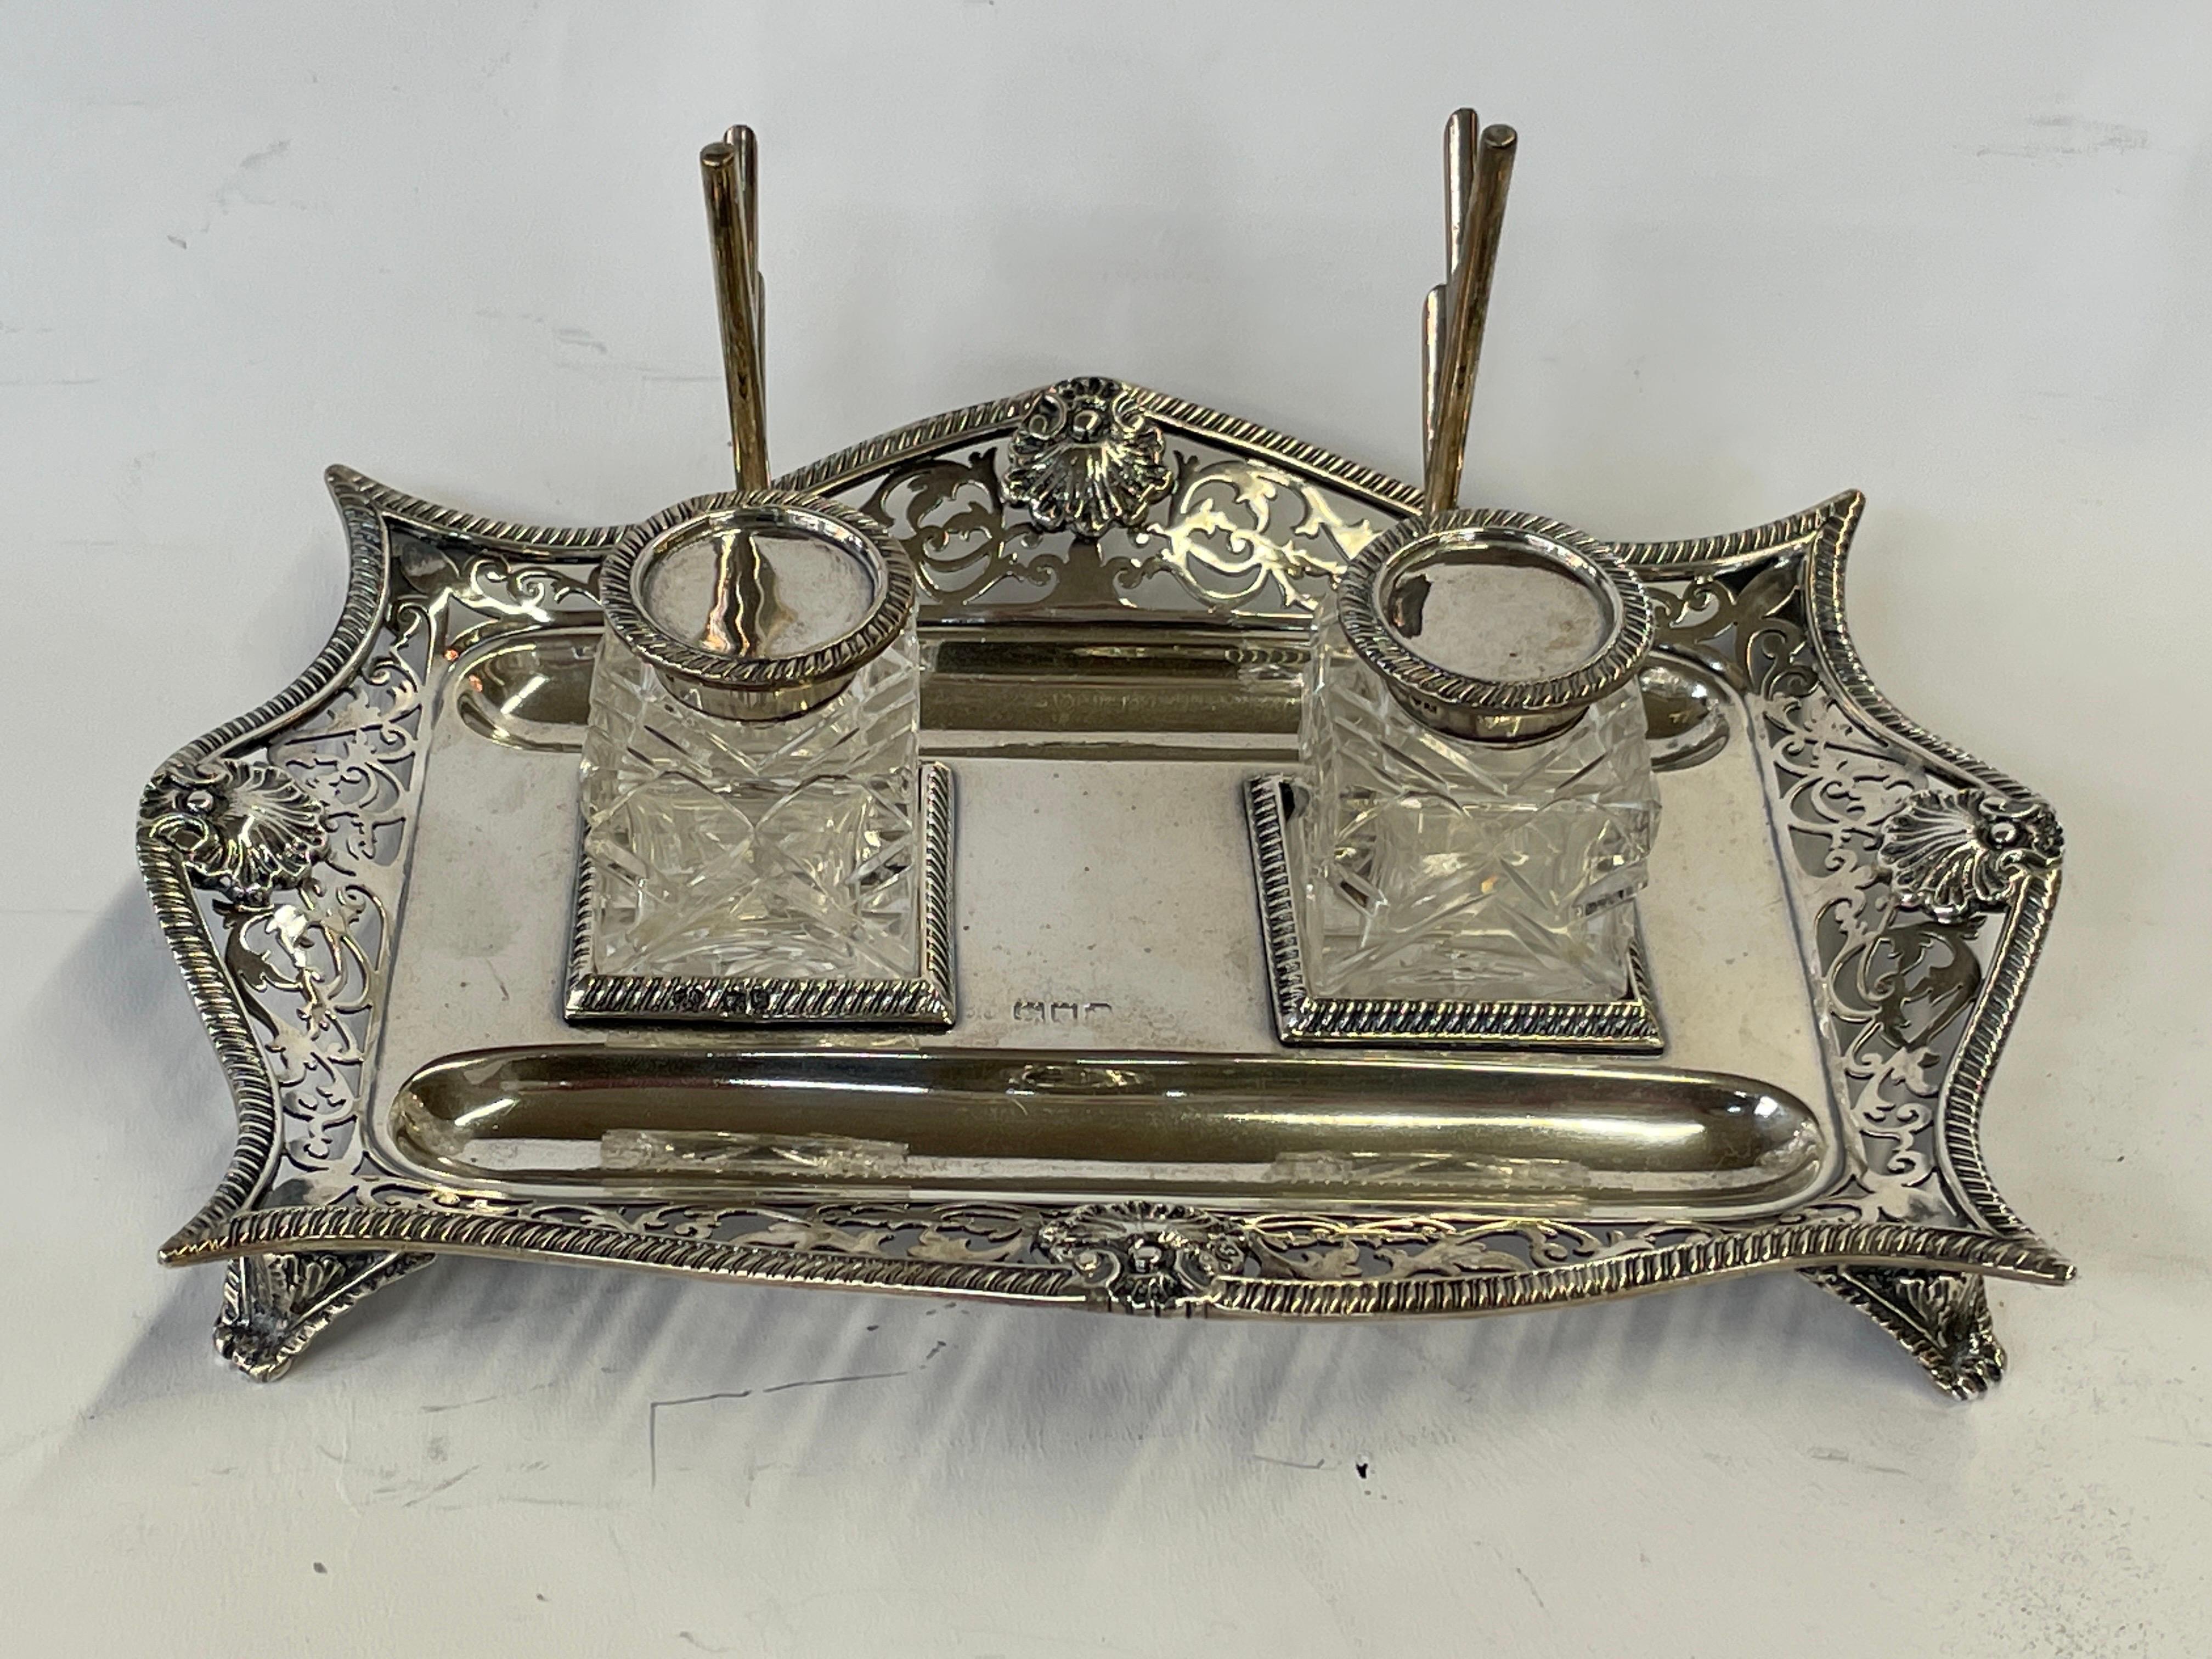 Exquisite Antique English hallmarked STERLING SILVER and cut crystal Two Bottle Inkstand or Standish, hallmarked London, 1904/'05 with maker's marks for the Royal Warranted silversmith, William Hutton & Sons. This Georgian style inkstand is